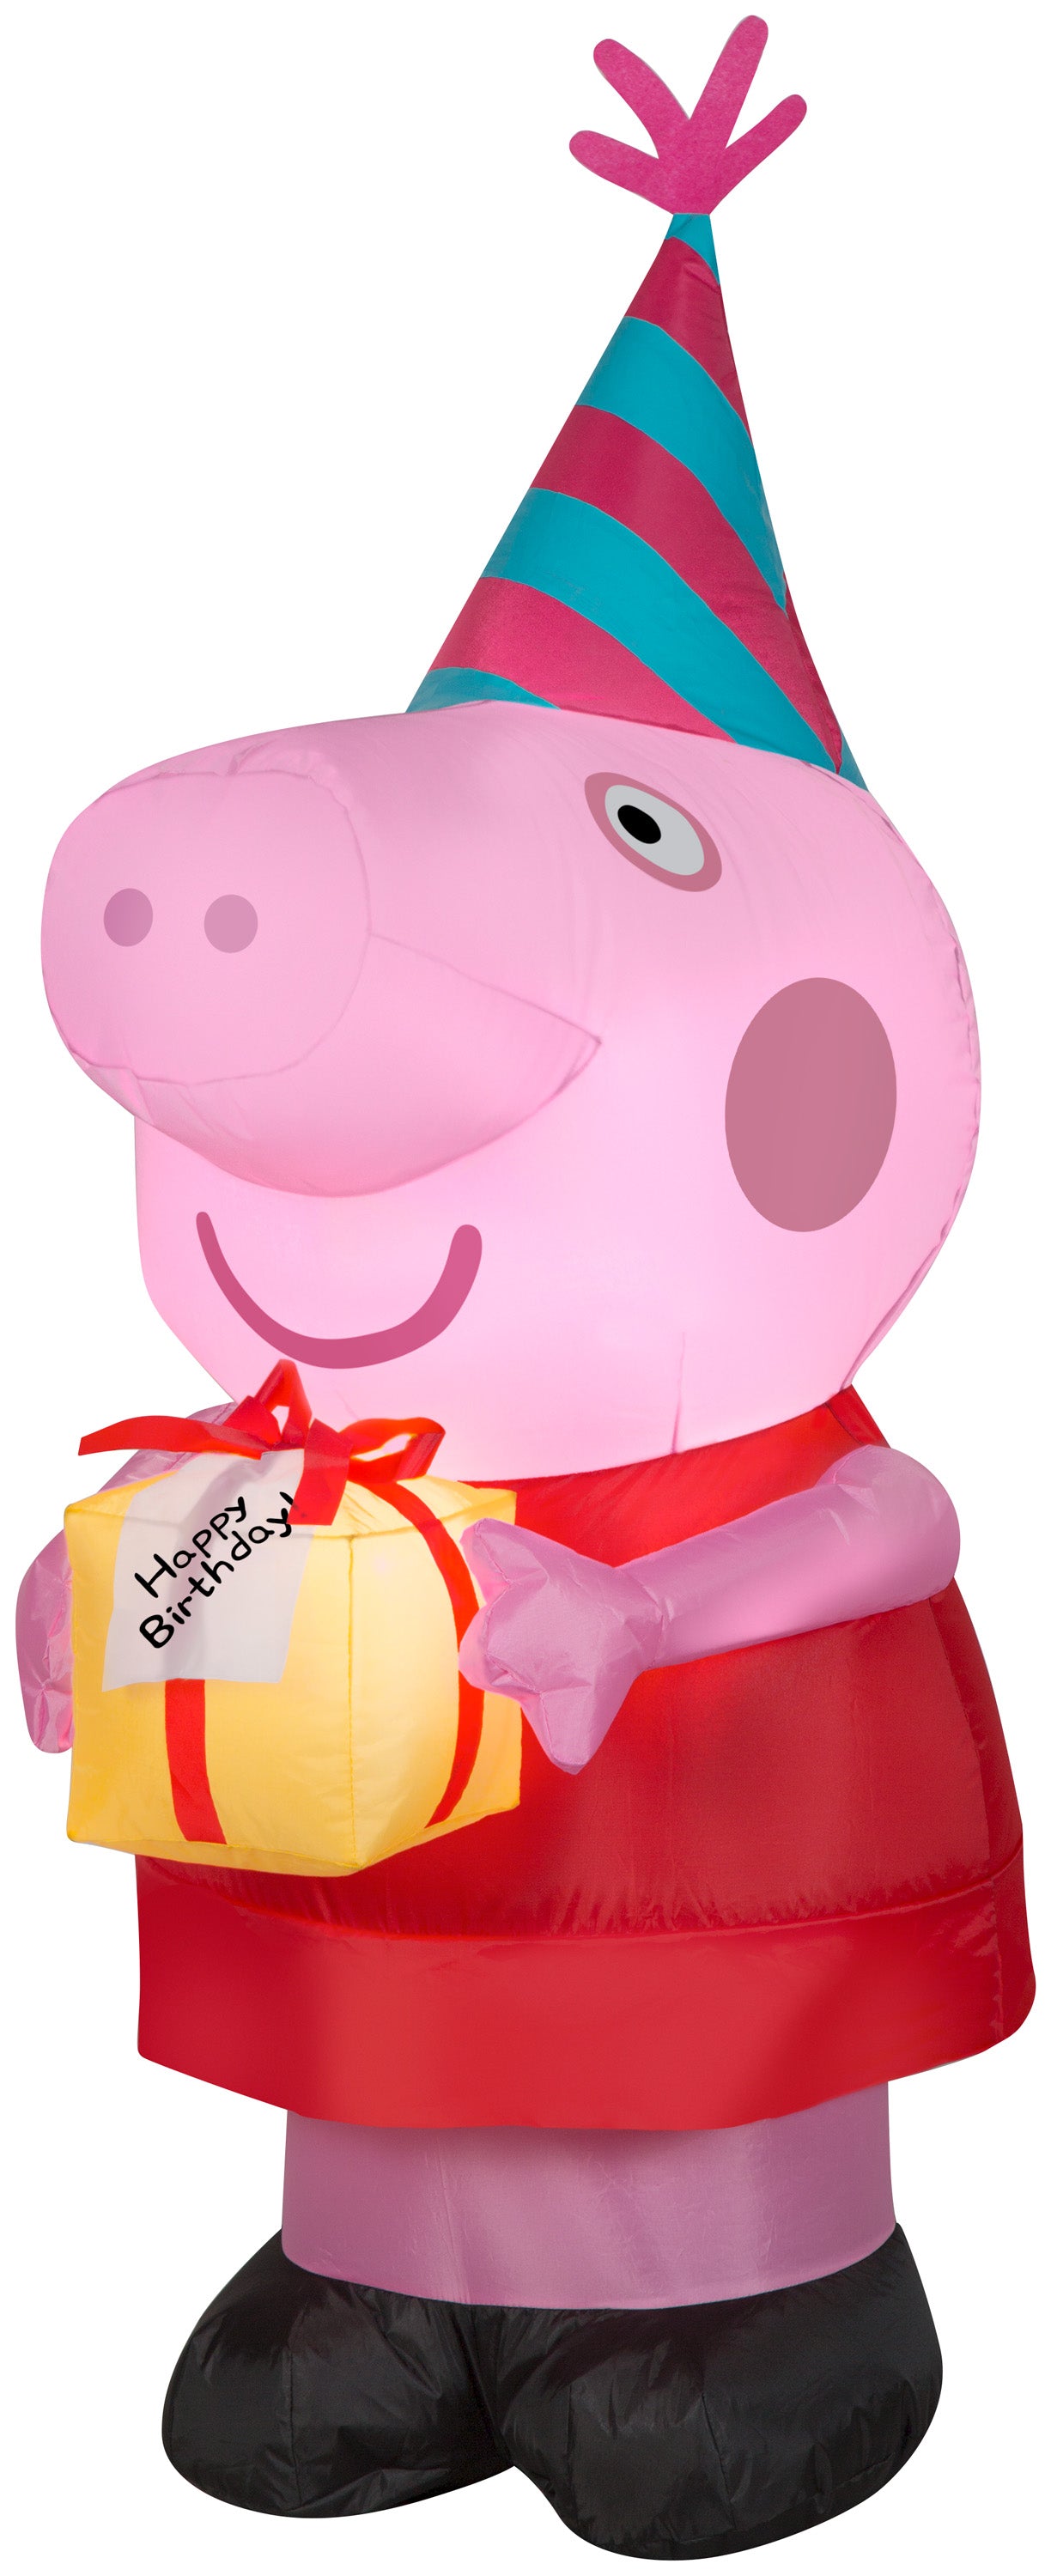 Gemmy Airblown Inflatable Birthday Party Peppa Pig, 3.5 ft Tall, pink